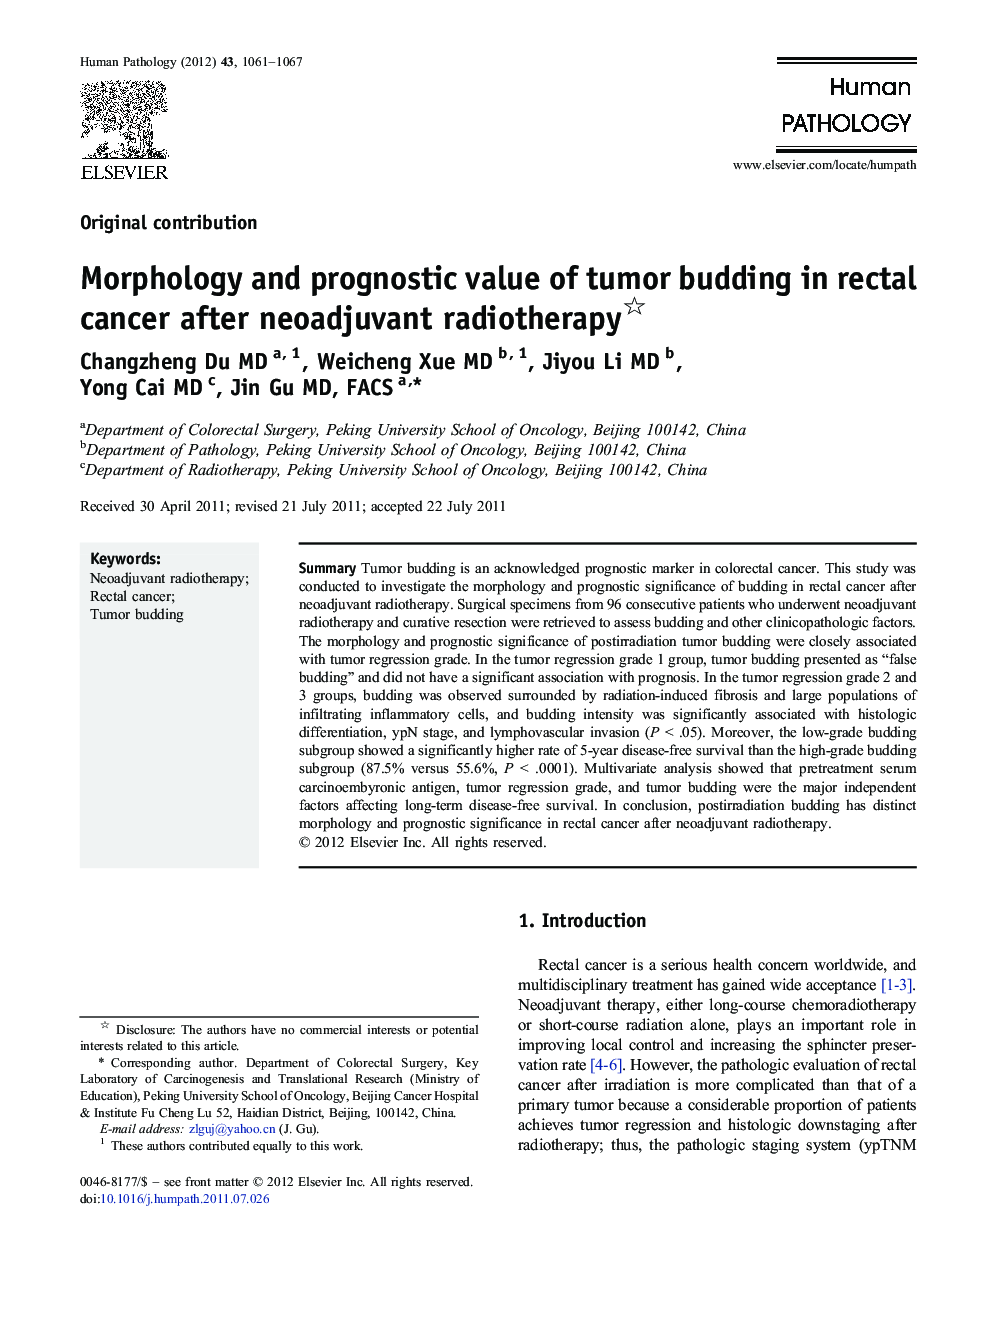 Morphology and prognostic value of tumor budding in rectal cancer after neoadjuvant radiotherapy 